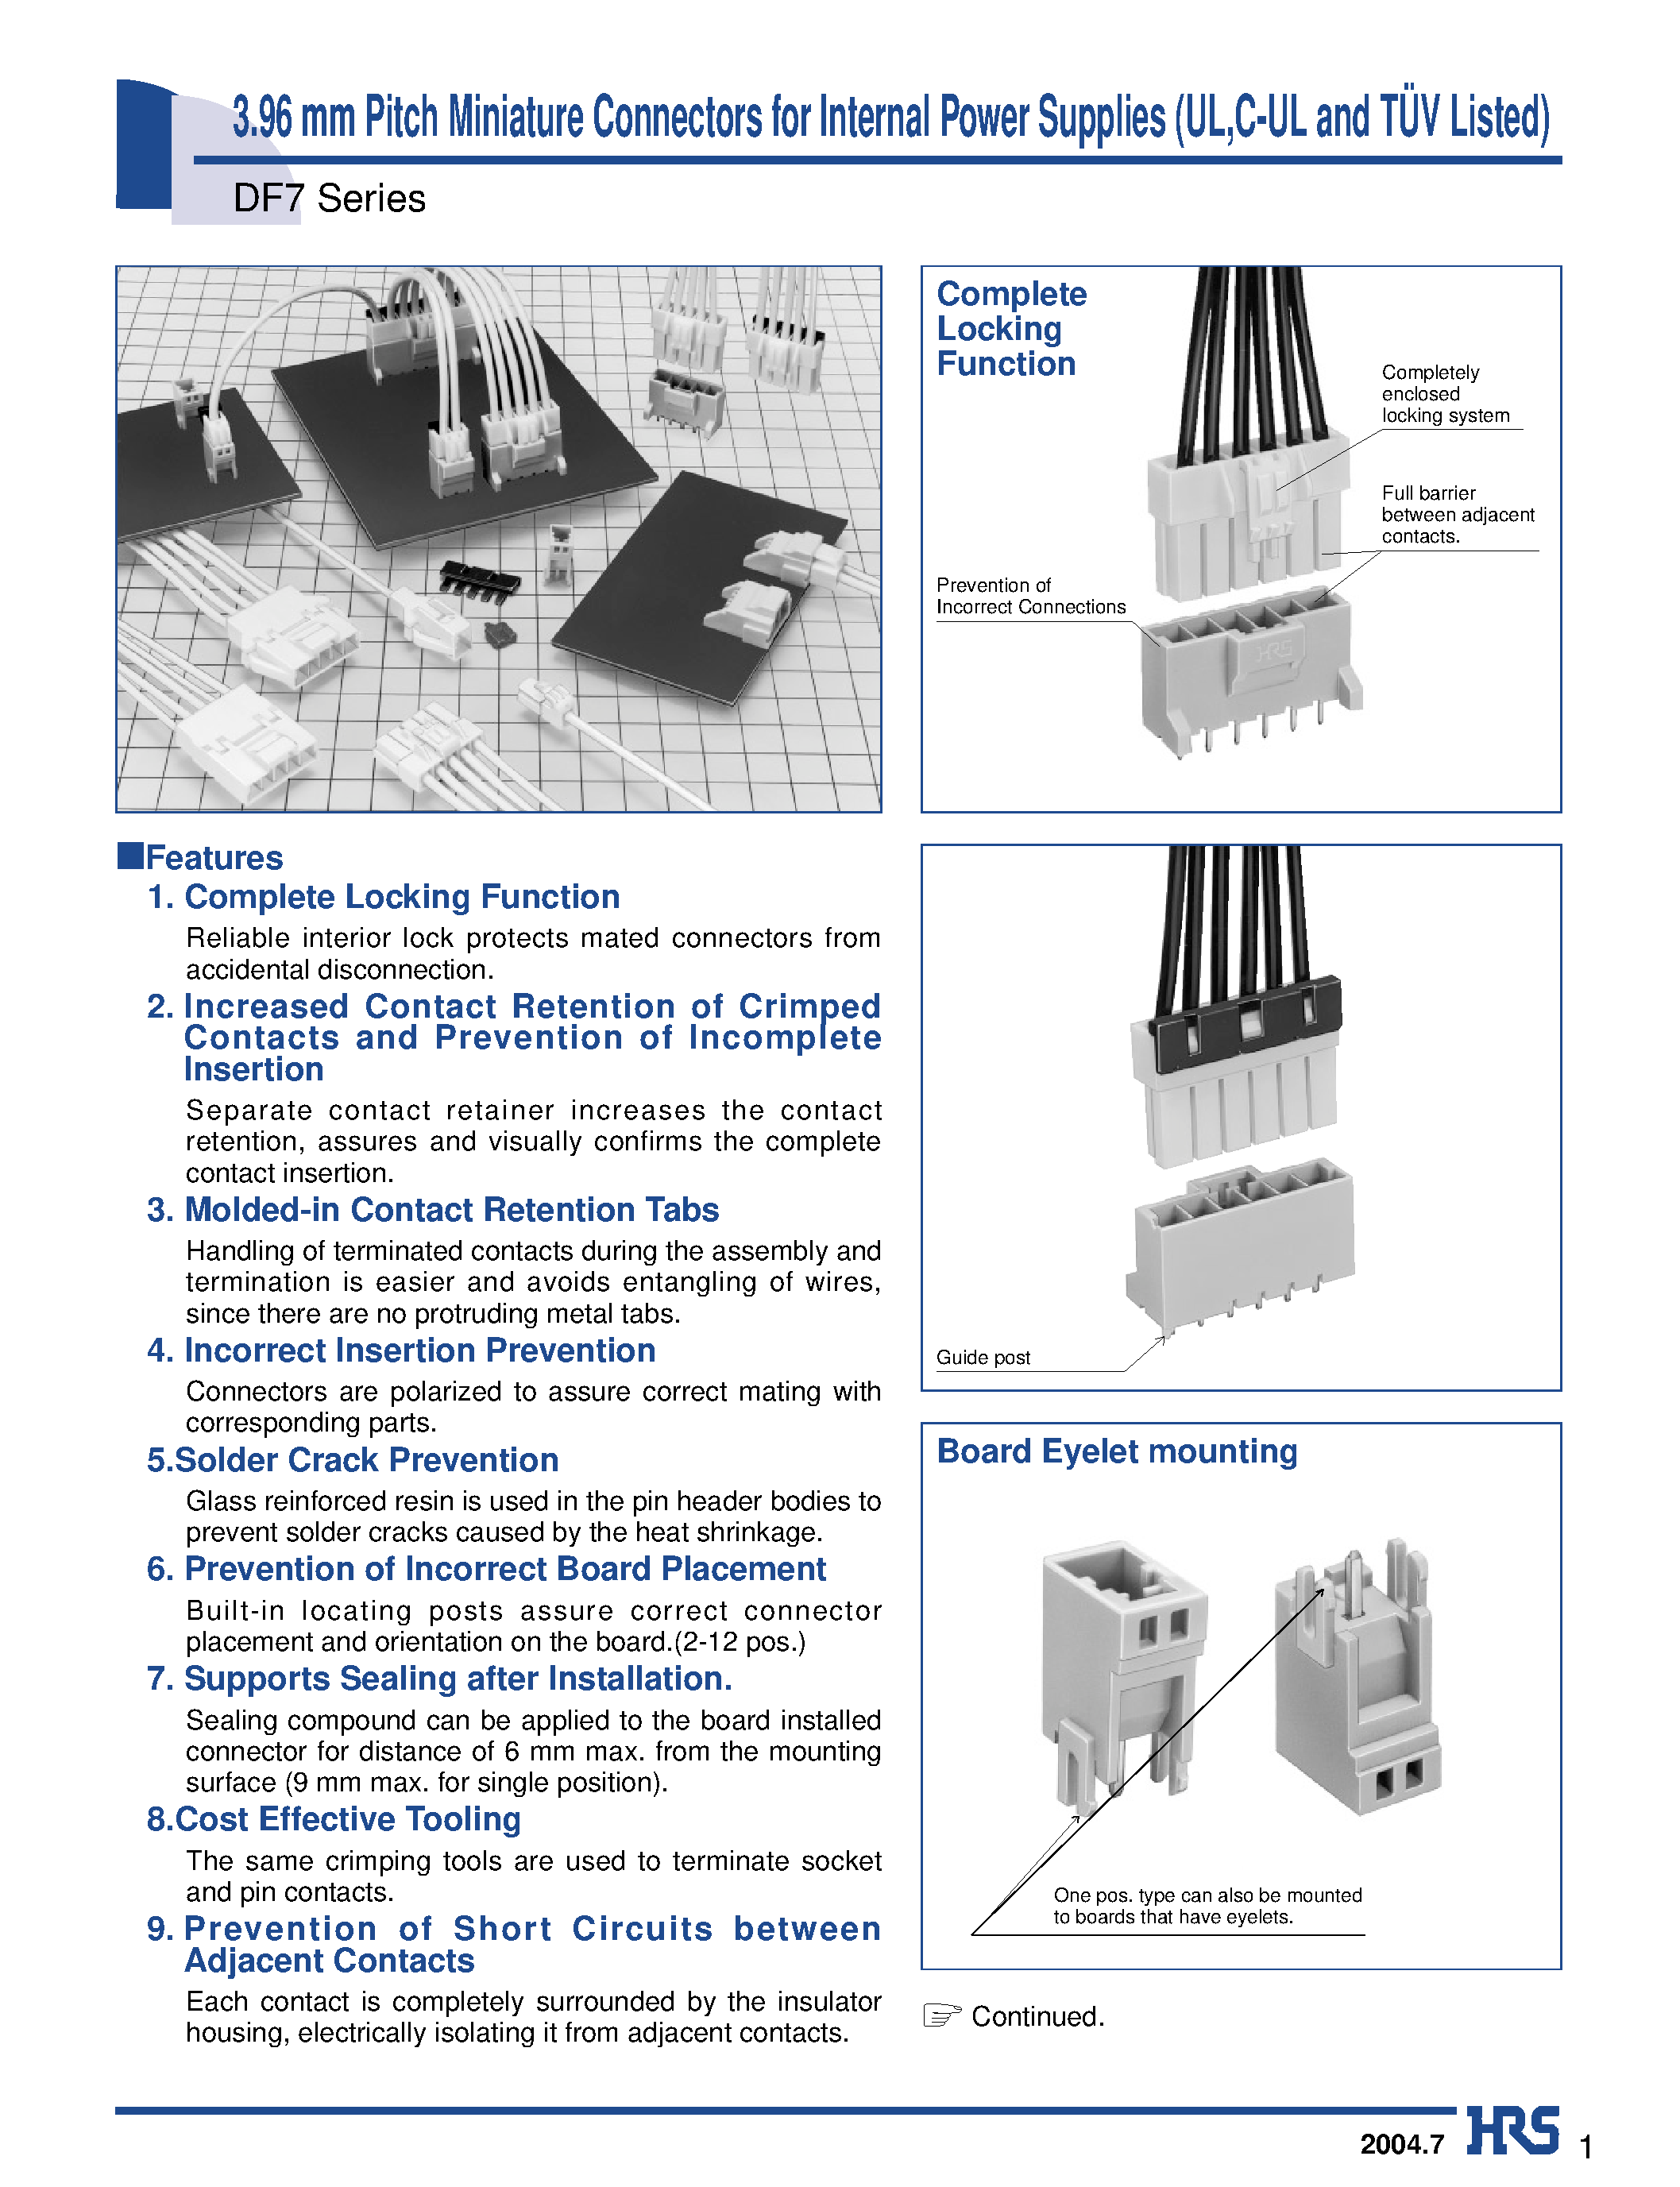 Datasheet DF7-1S-3.96C - 3.96 mm Pitch Miniature Connectors for Internal Power Supplies (UL /C-UL and TUV Listed) page 1